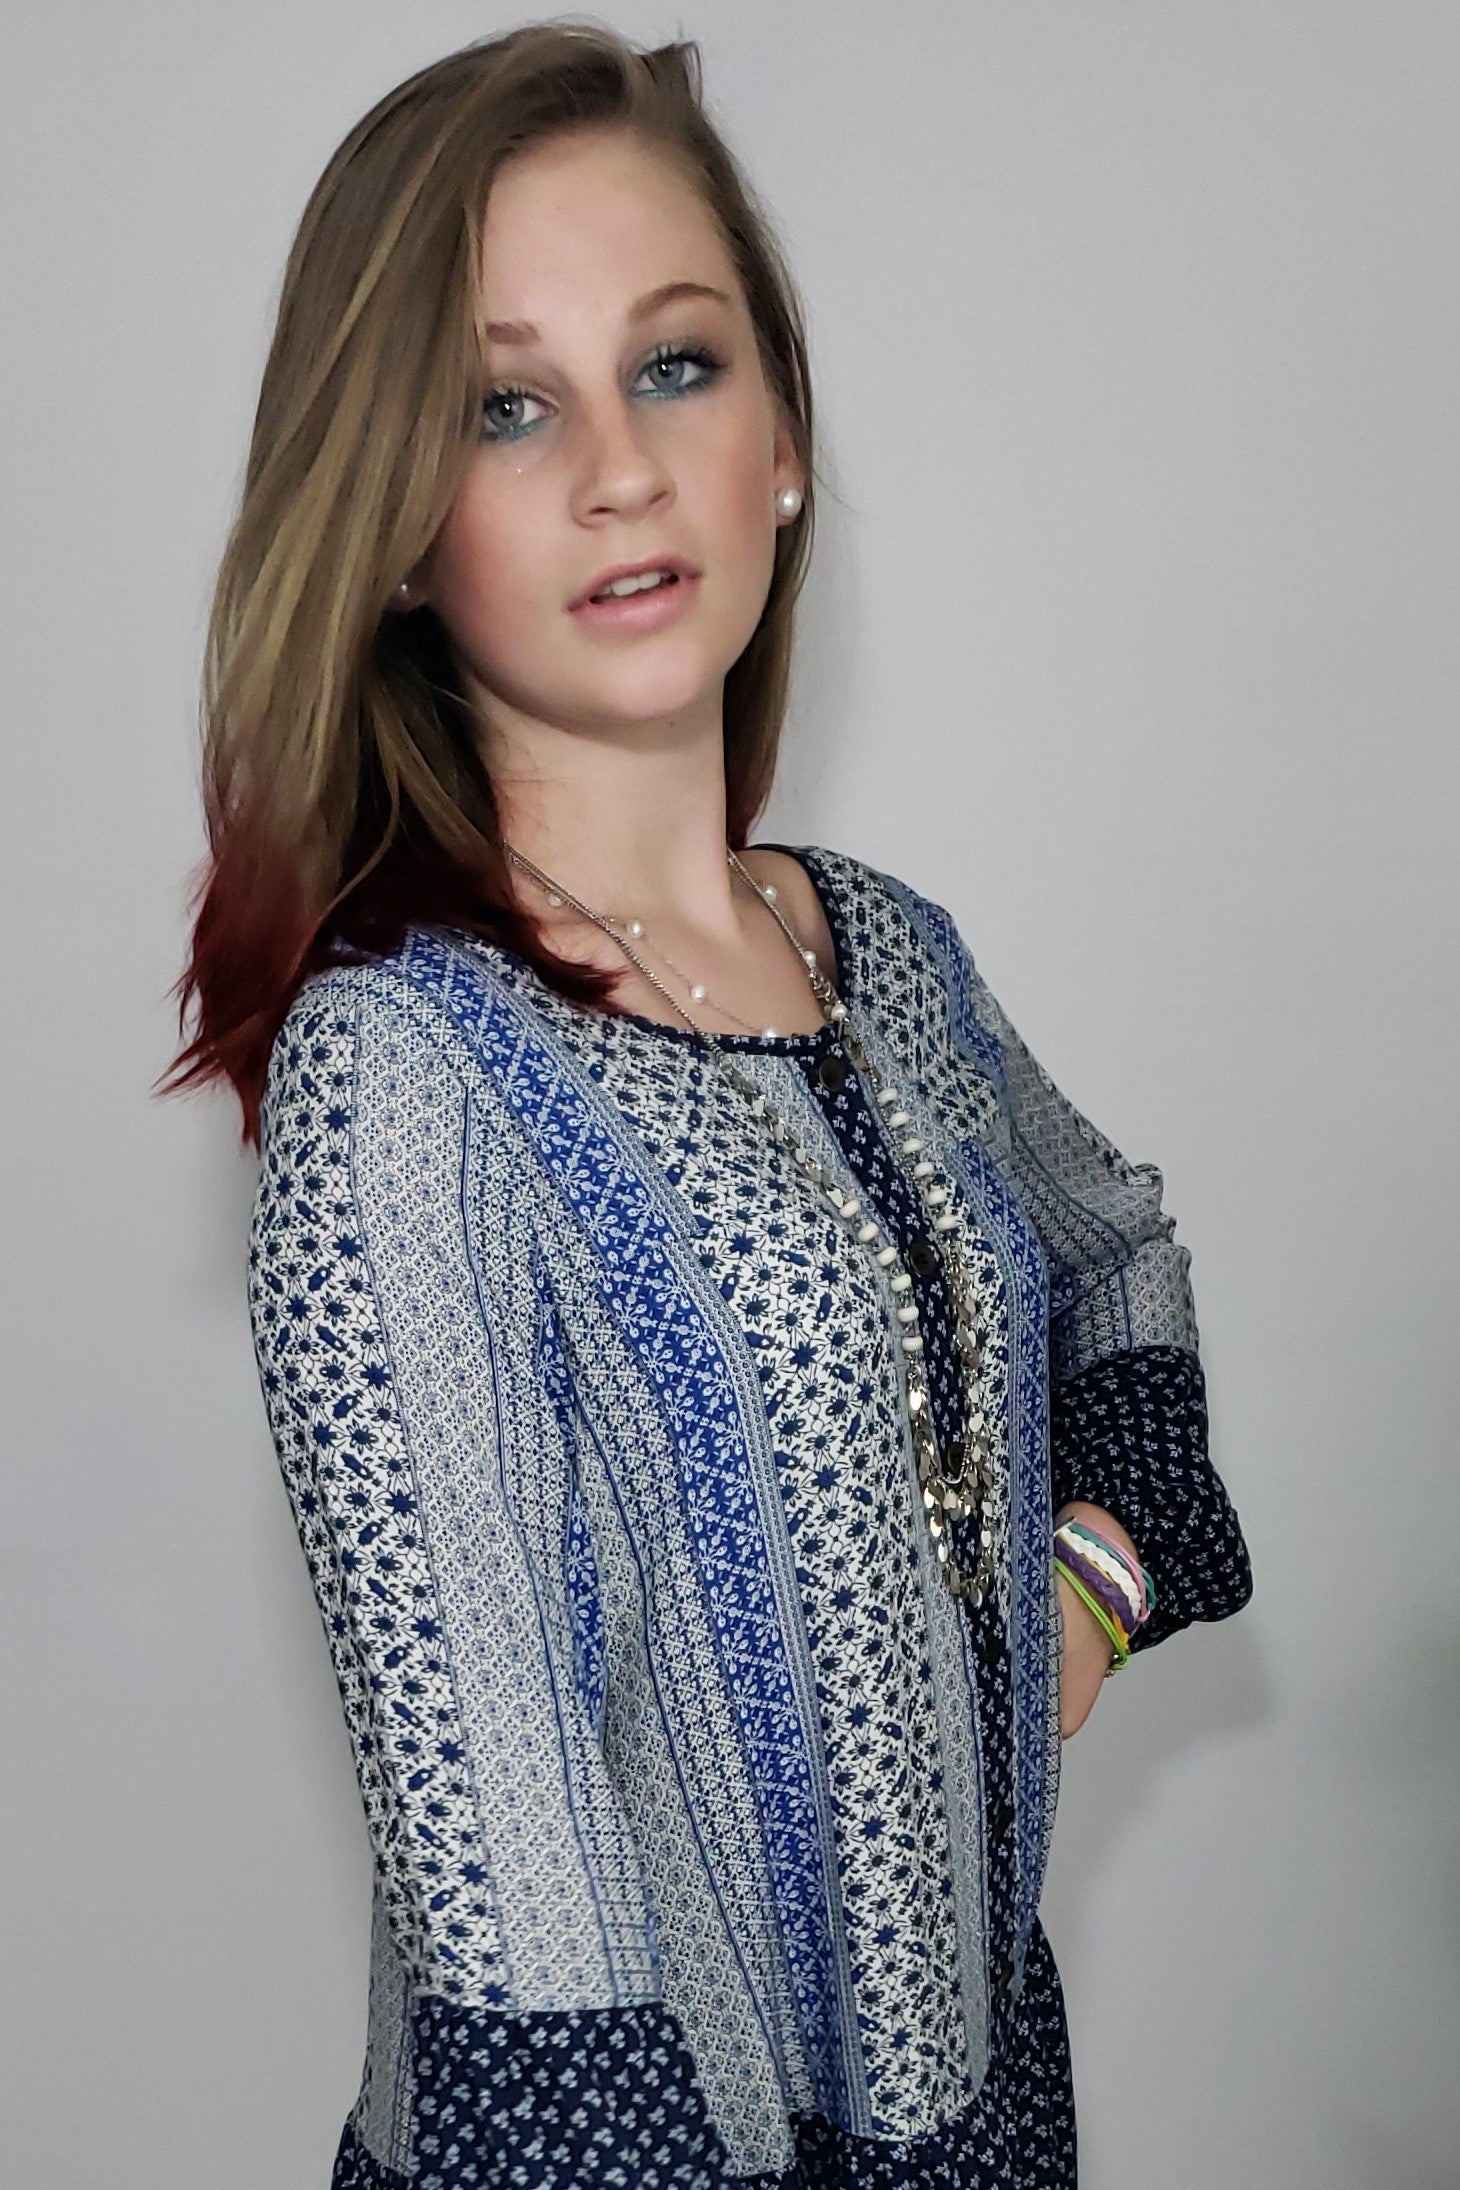 Mally Shades of Blooz Ruffle Button Down Contrast Tunic Dress - Houzz of DVA Boutique